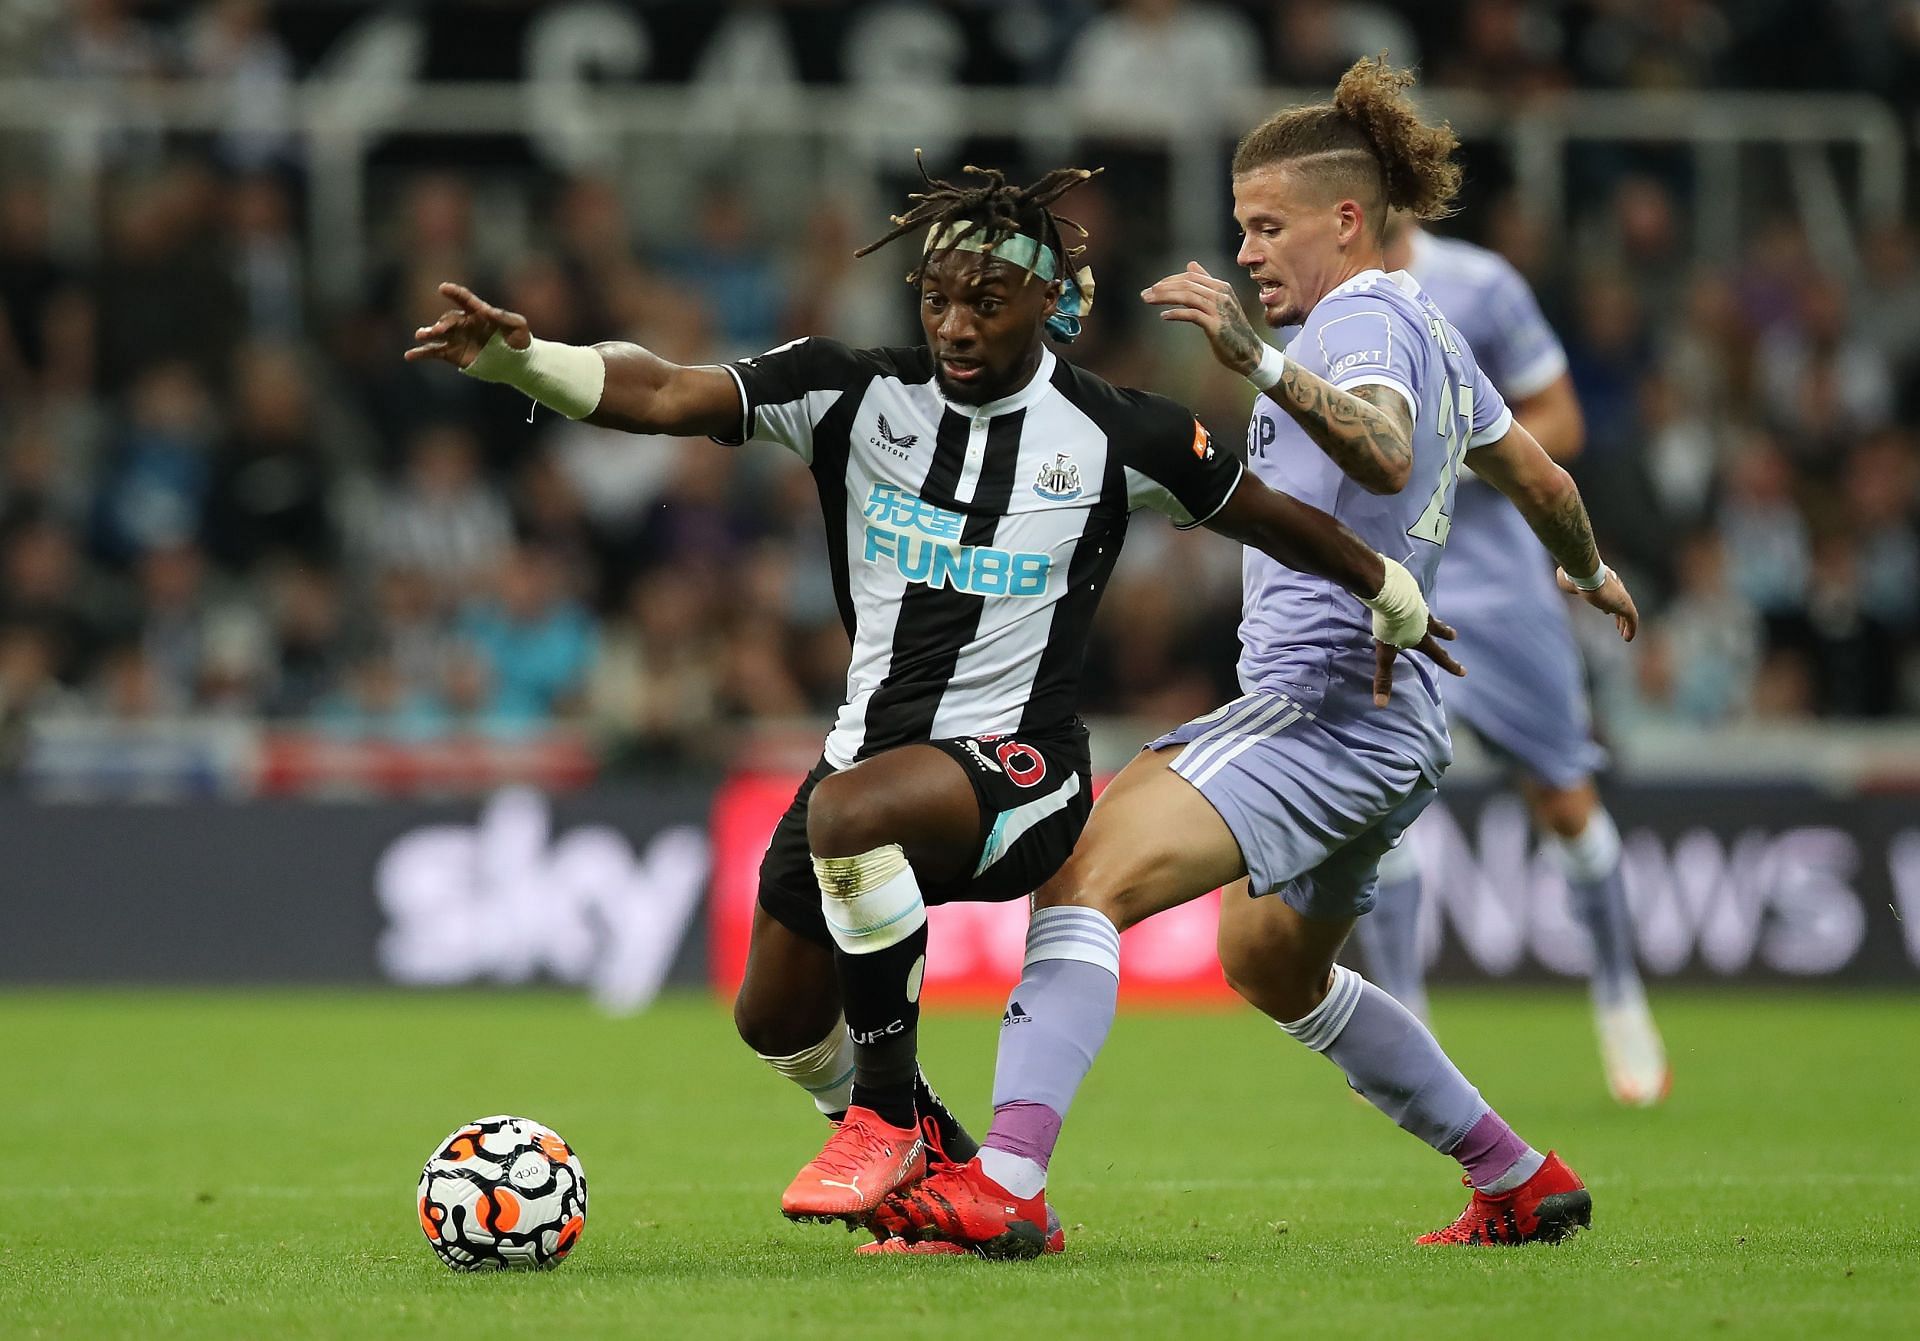 Saint-Maximin drawing a foul from Kalvin Phillips